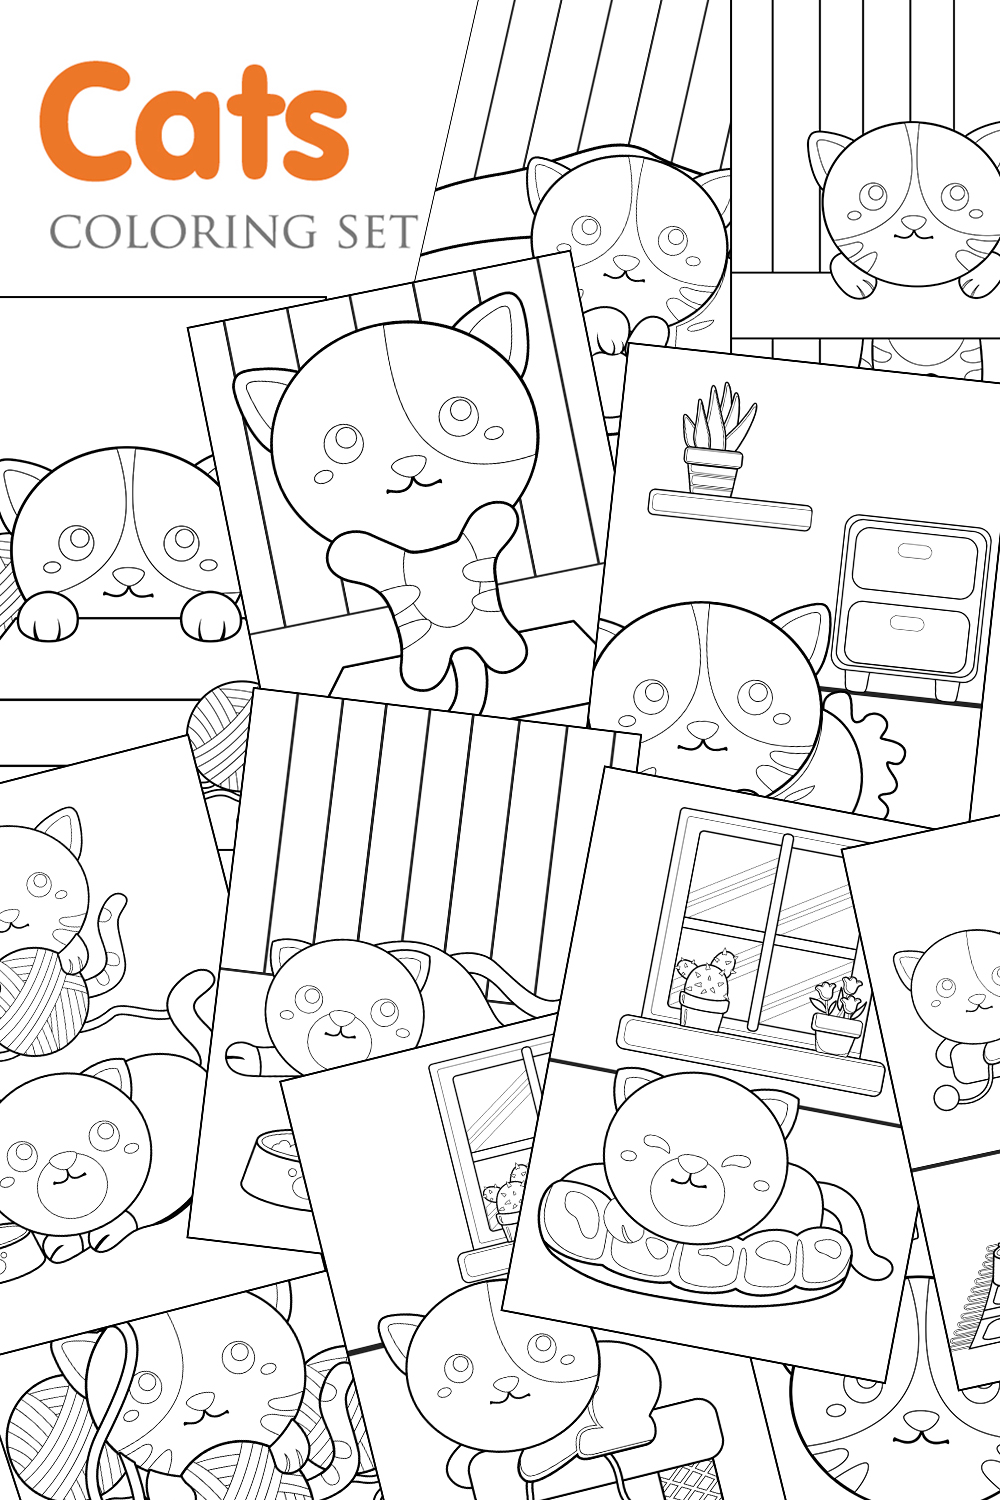 Cute Cat Animal Coloring Pages Activity For Kids And Adult pinterest preview image.